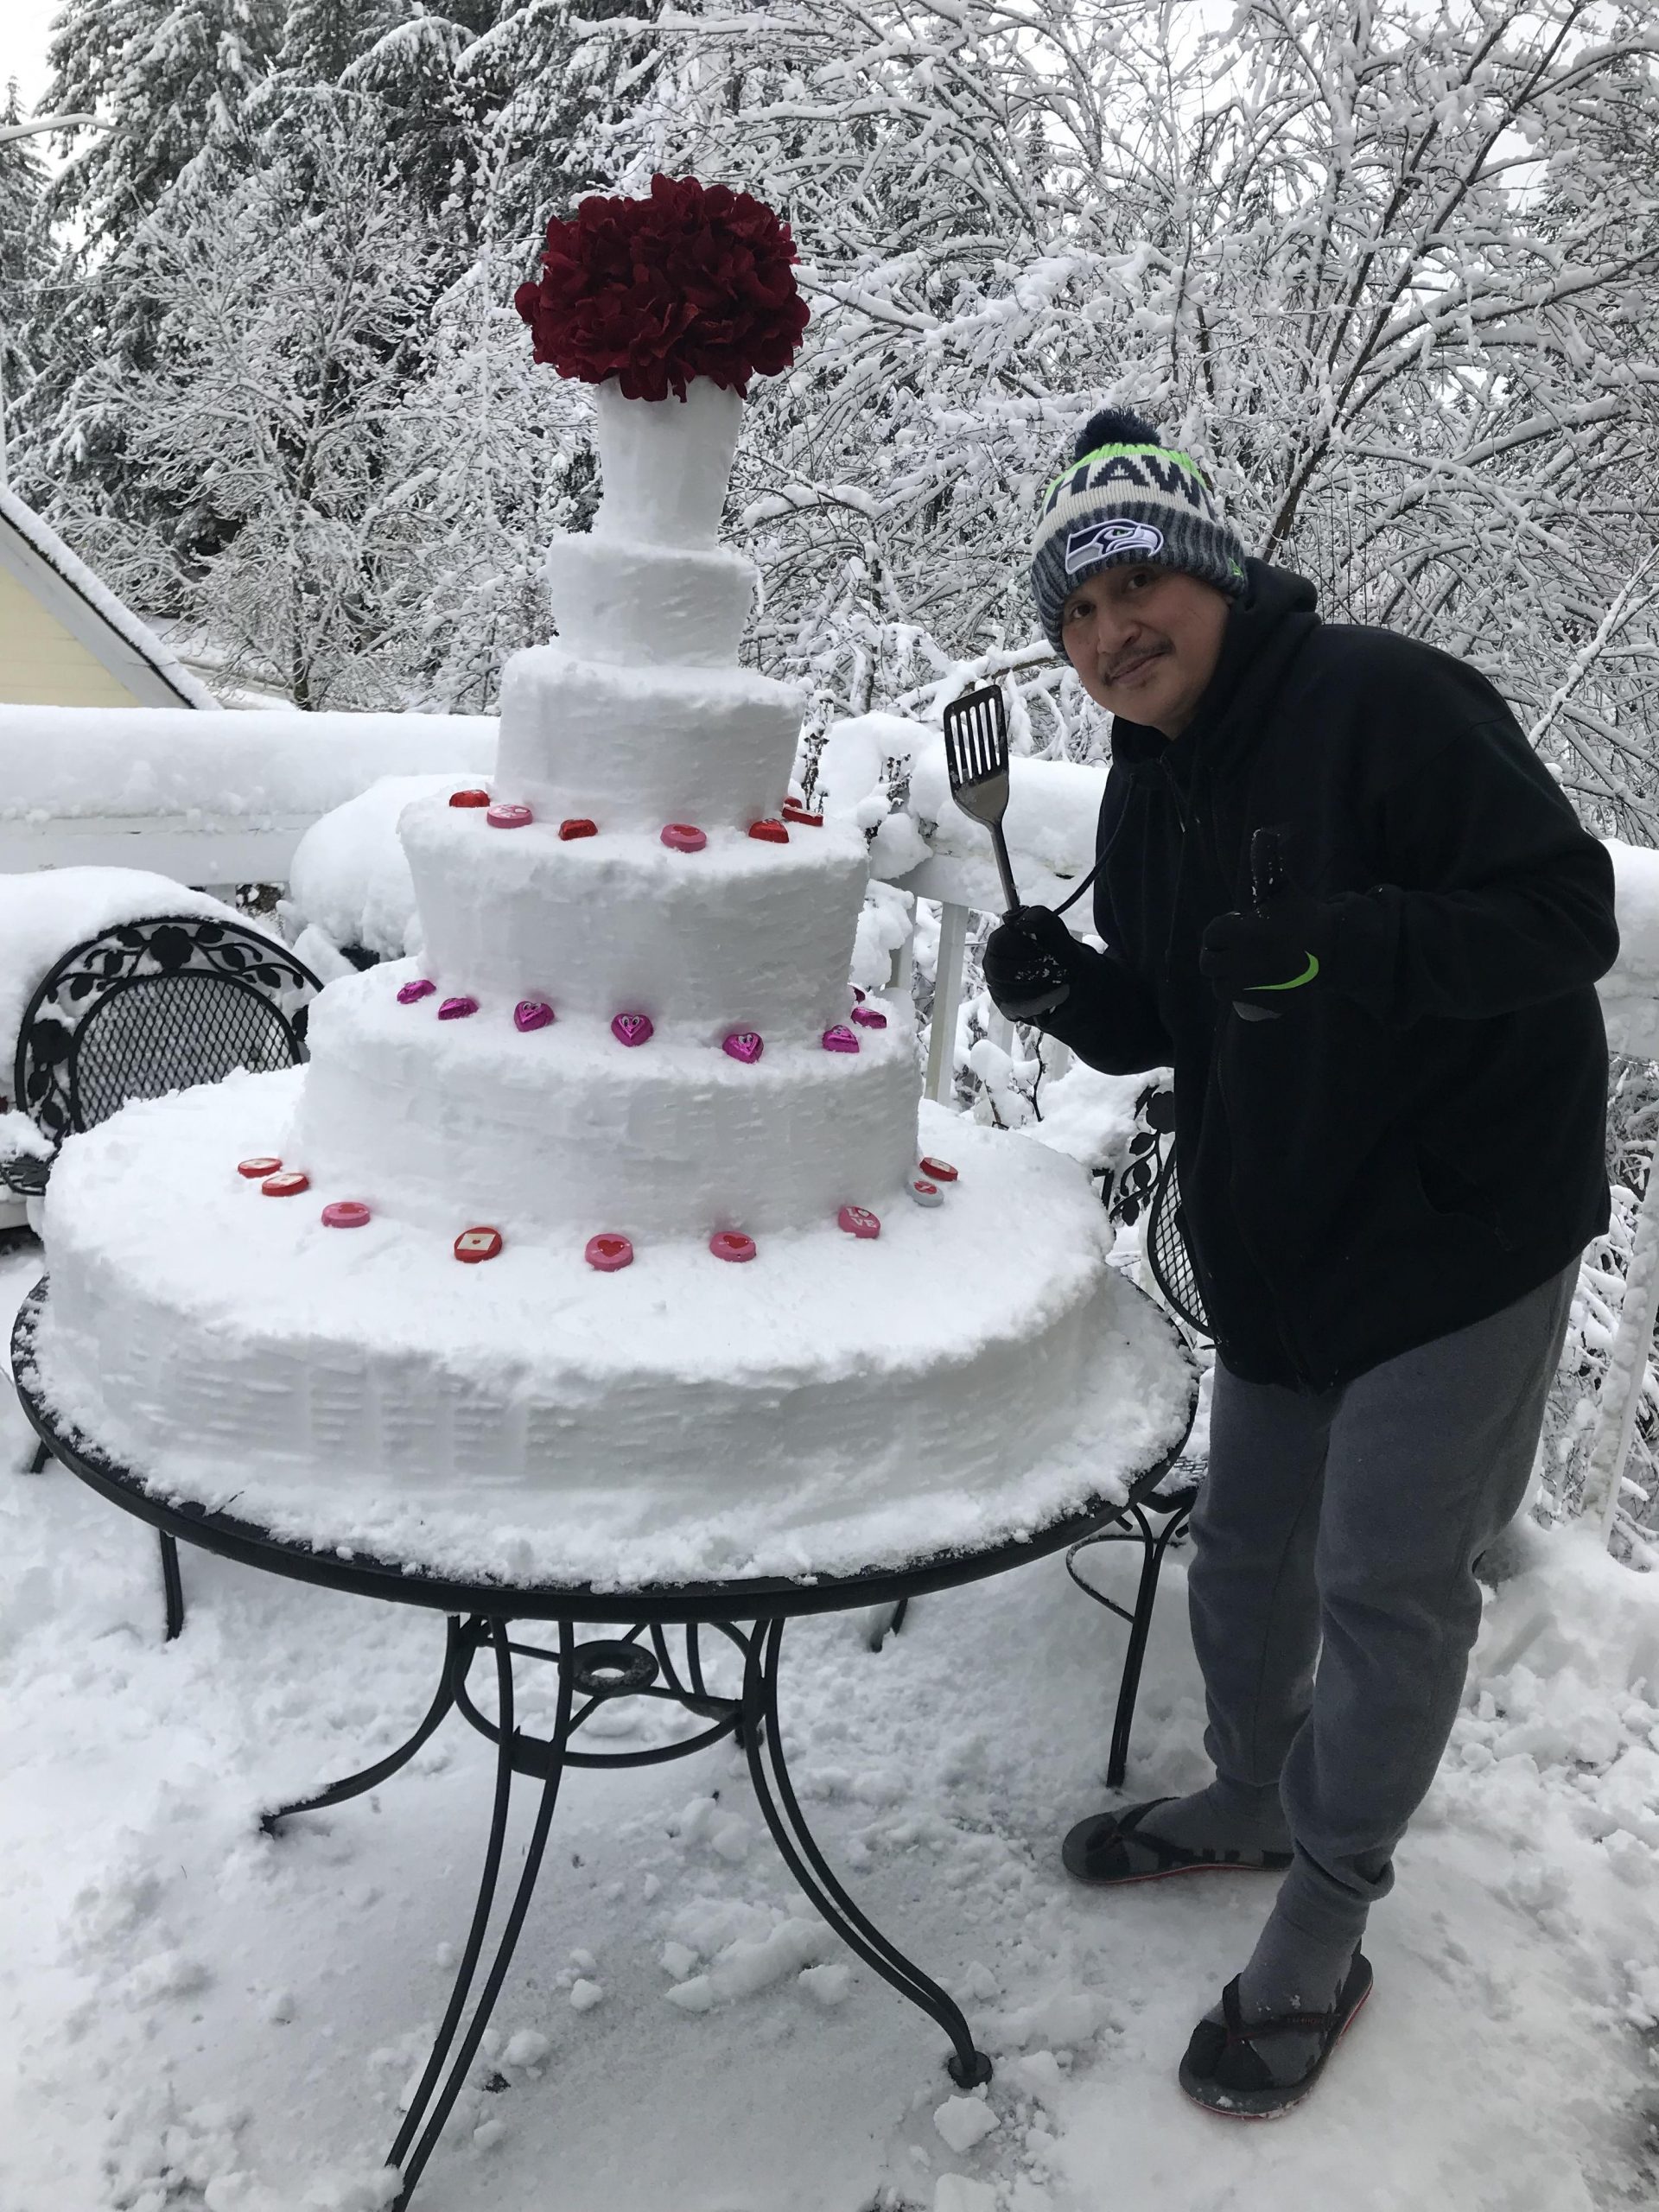 man posing next to a snow sculpture in the form of a giant cake 